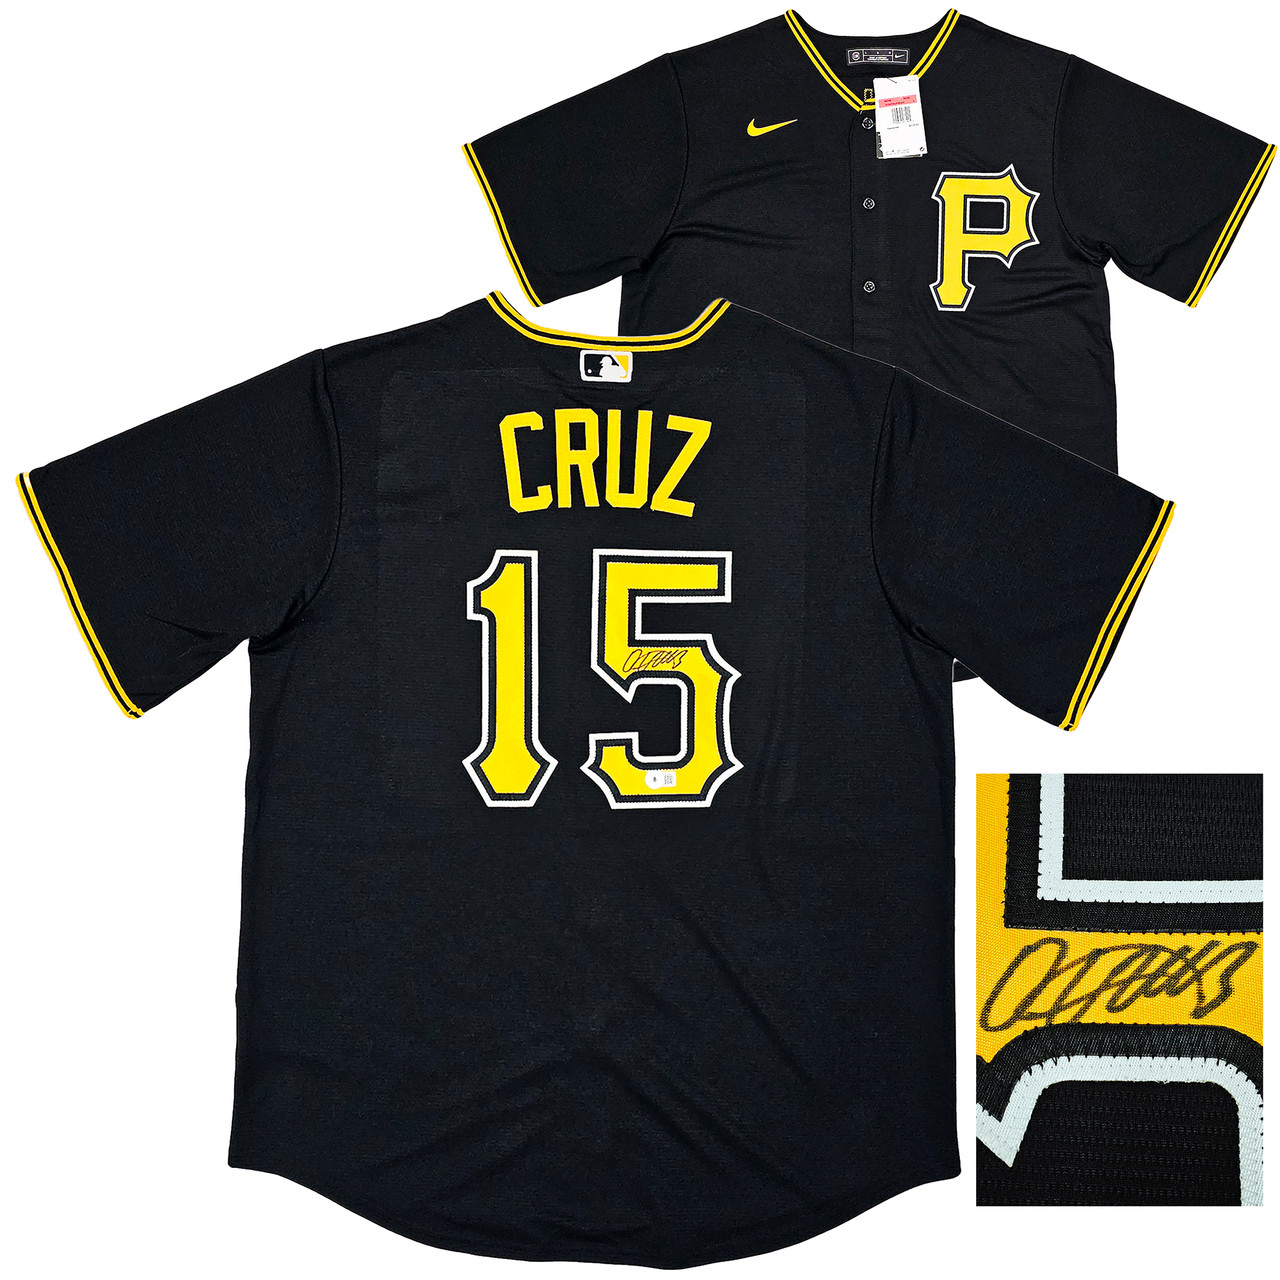 Pittsburgh Pirates jersey deals